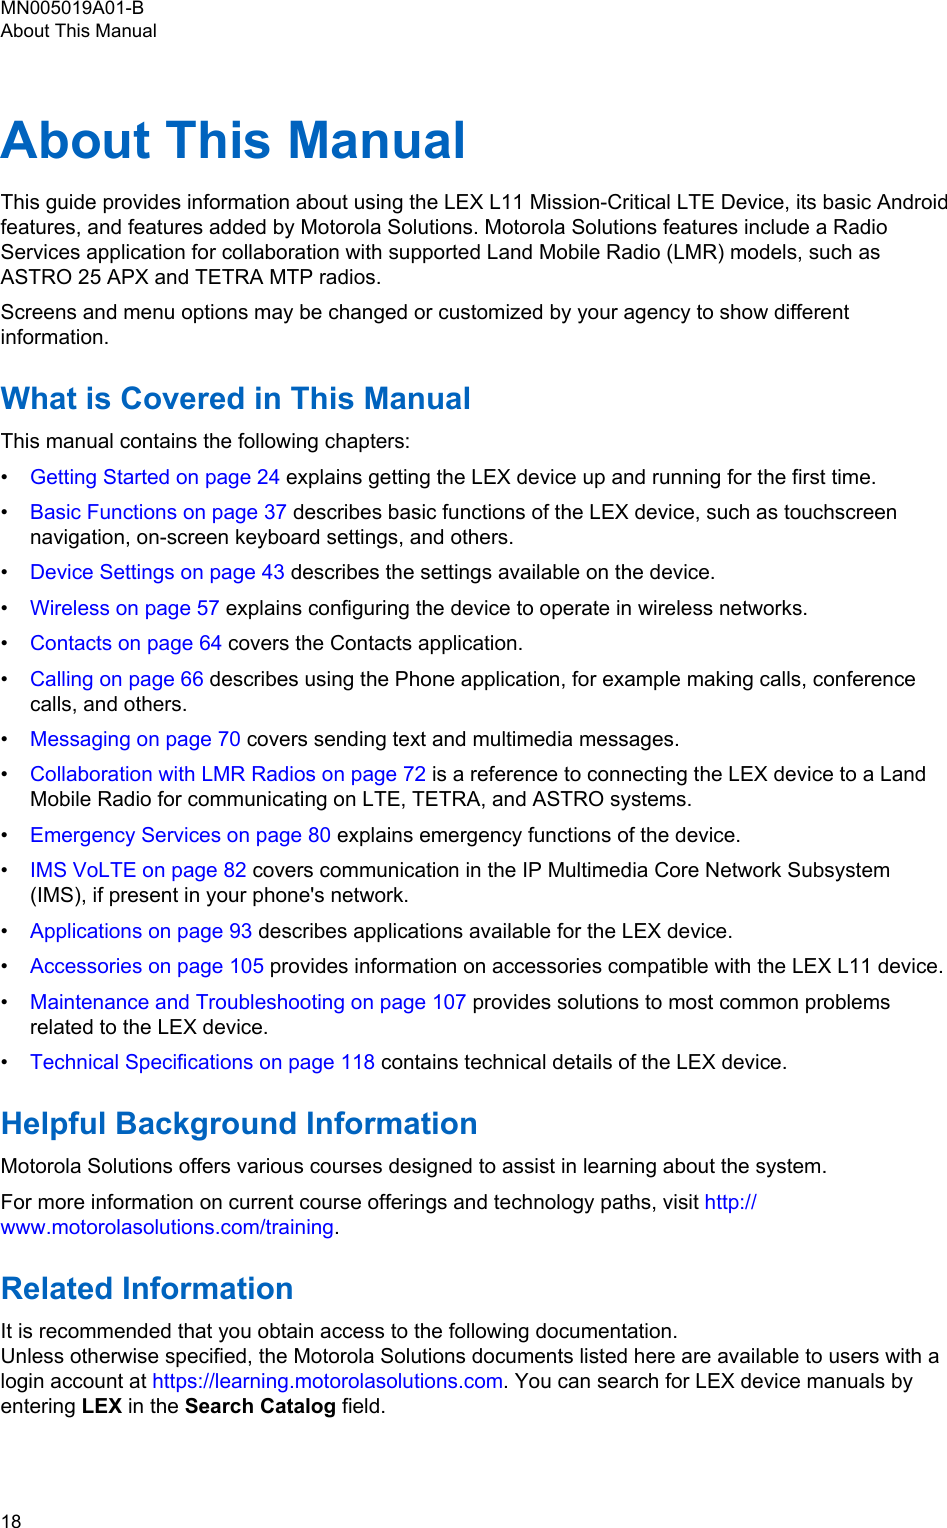 About This ManualThis guide provides information about using the LEX L11 Mission-Critical LTE Device, its basic Androidfeatures, and features added by Motorola Solutions. Motorola Solutions features include a RadioServices application for collaboration with supported Land Mobile Radio (LMR) models, such asASTRO 25 APX and TETRA MTP radios.Screens and menu options may be changed or customized by your agency to show differentinformation.What is Covered in This ManualThis manual contains the following chapters:•Getting Started on page 24 explains getting the LEX device up and running for the first time.•Basic Functions on page 37 describes basic functions of the LEX device, such as touchscreennavigation, on-screen keyboard settings, and others.•Device Settings on page 43 describes the settings available on the device.•Wireless on page 57 explains configuring the device to operate in wireless networks.•Contacts on page 64 covers the Contacts application.•Calling on page 66 describes using the Phone application, for example making calls, conferencecalls, and others.•Messaging on page 70 covers sending text and multimedia messages.•Collaboration with LMR Radios on page 72 is a reference to connecting the LEX device to a LandMobile Radio for communicating on LTE, TETRA, and ASTRO systems.•Emergency Services on page 80 explains emergency functions of the device.•IMS VoLTE on page 82 covers communication in the IP Multimedia Core Network Subsystem(IMS), if present in your phone&apos;s network.•Applications on page 93 describes applications available for the LEX device.•Accessories on page 105 provides information on accessories compatible with the LEX L11 device.•Maintenance and Troubleshooting on page 107 provides solutions to most common problemsrelated to the LEX device.•Technical Specifications on page 118 contains technical details of the LEX device.Helpful Background InformationMotorola Solutions offers various courses designed to assist in learning about the system.For more information on current course offerings and technology paths, visit http://www.motorolasolutions.com/training.Related InformationIt is recommended that you obtain access to the following documentation.Unless otherwise specified, the Motorola Solutions documents listed here are available to users with alogin account at https://learning.motorolasolutions.com. You can search for LEX device manuals byentering LEX in the Search Catalog field.MN005019A01-BAbout This Manual18  